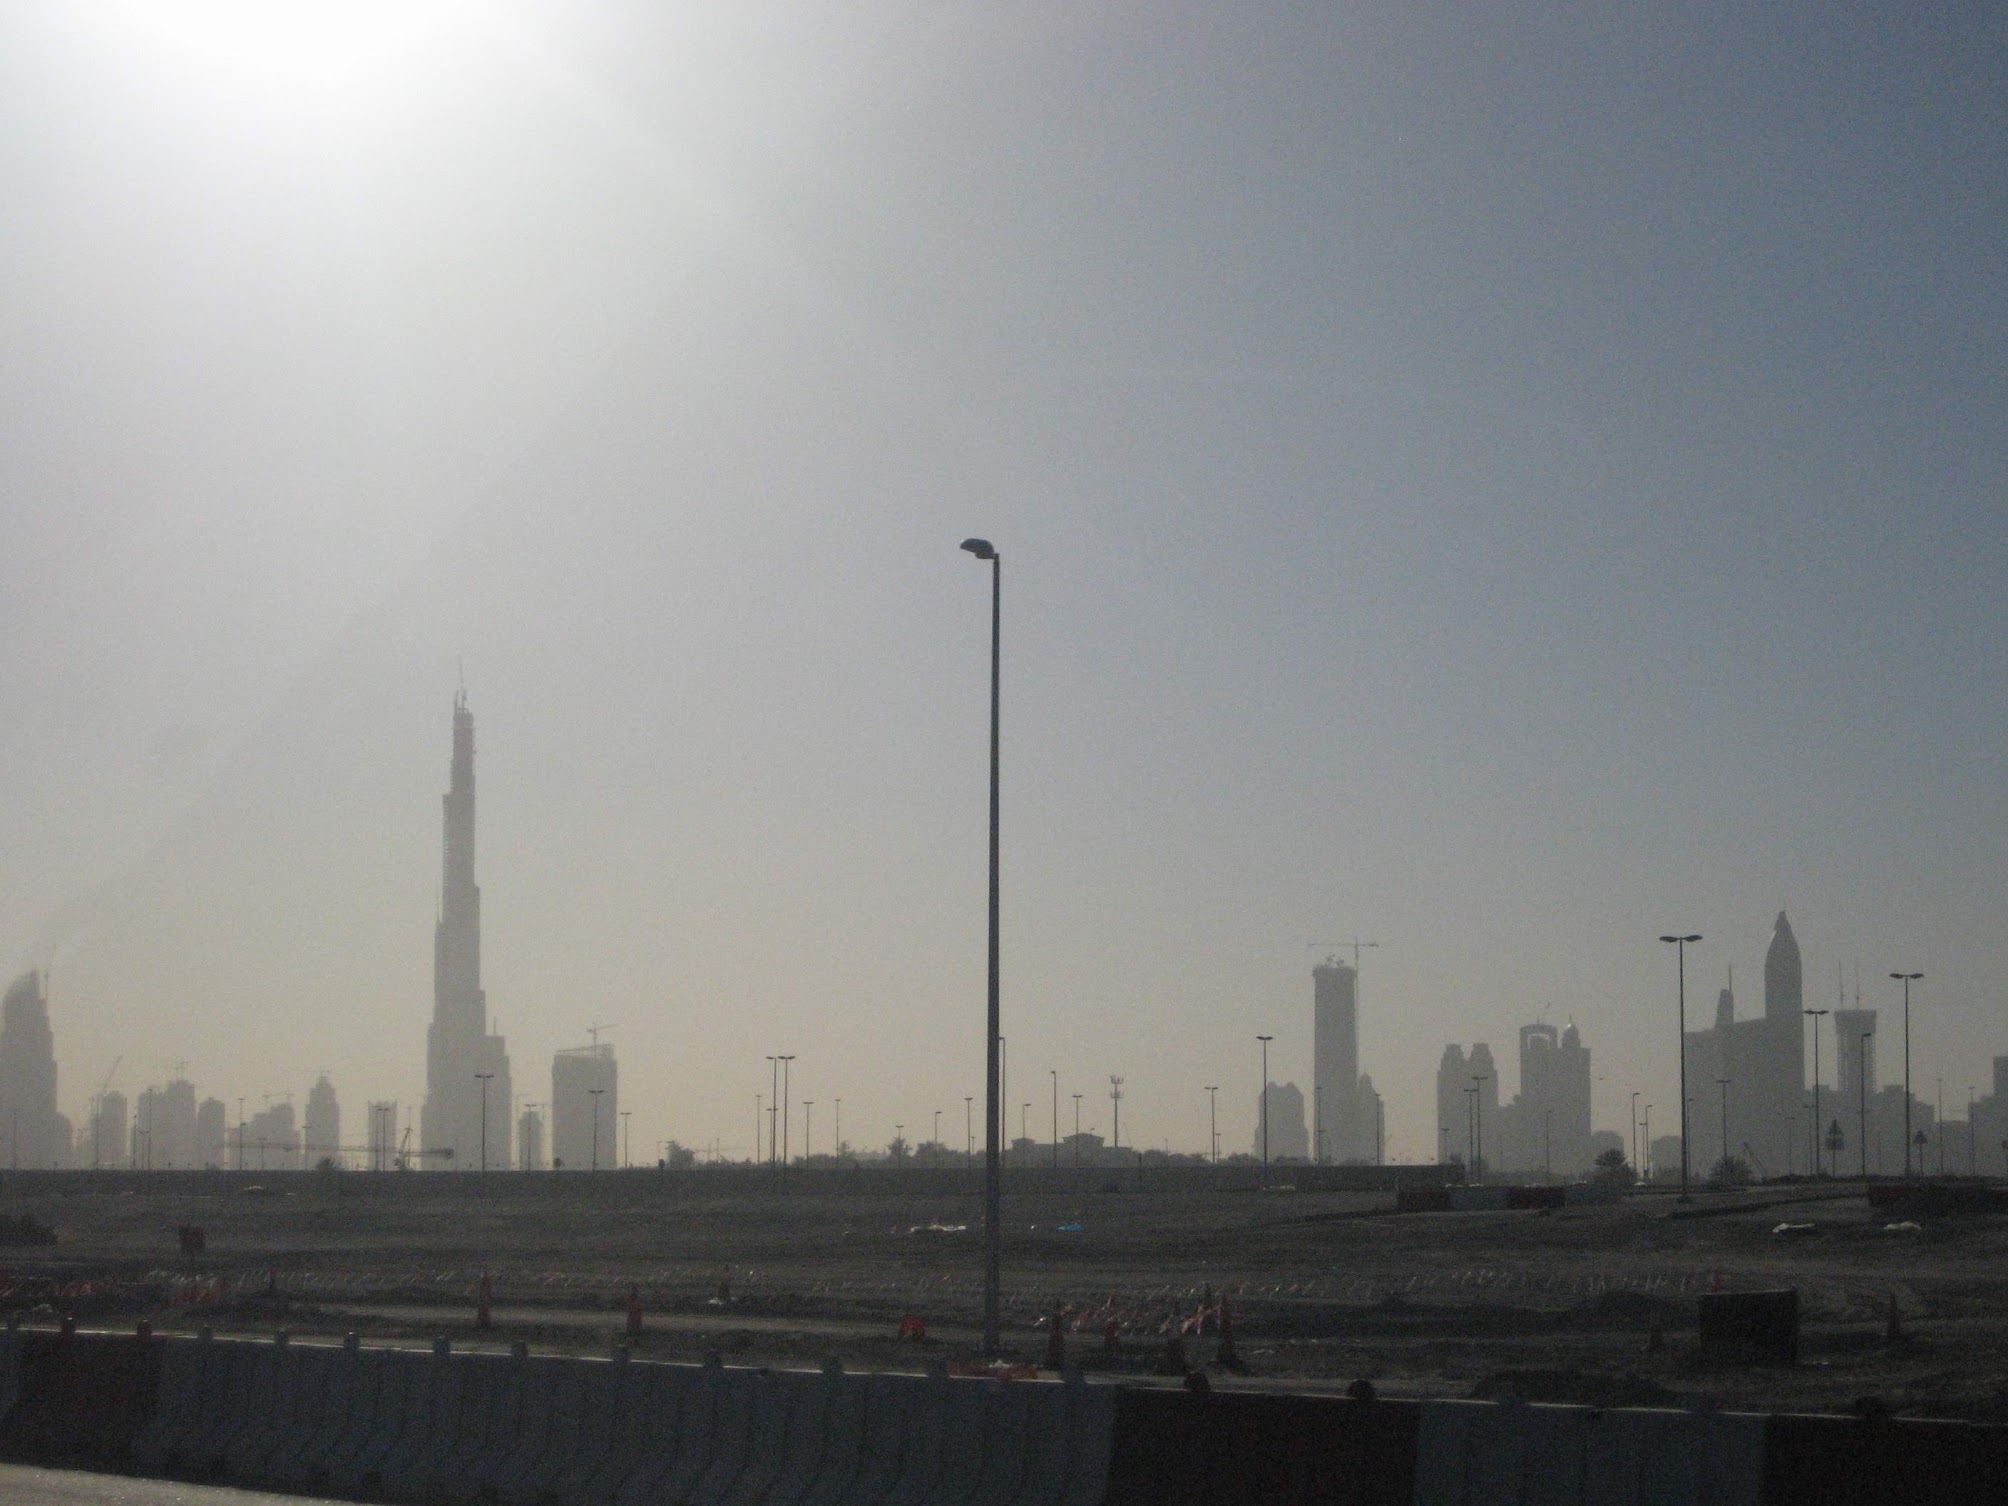 The Burj Khalifa, the tallest building in the world, while under construction.